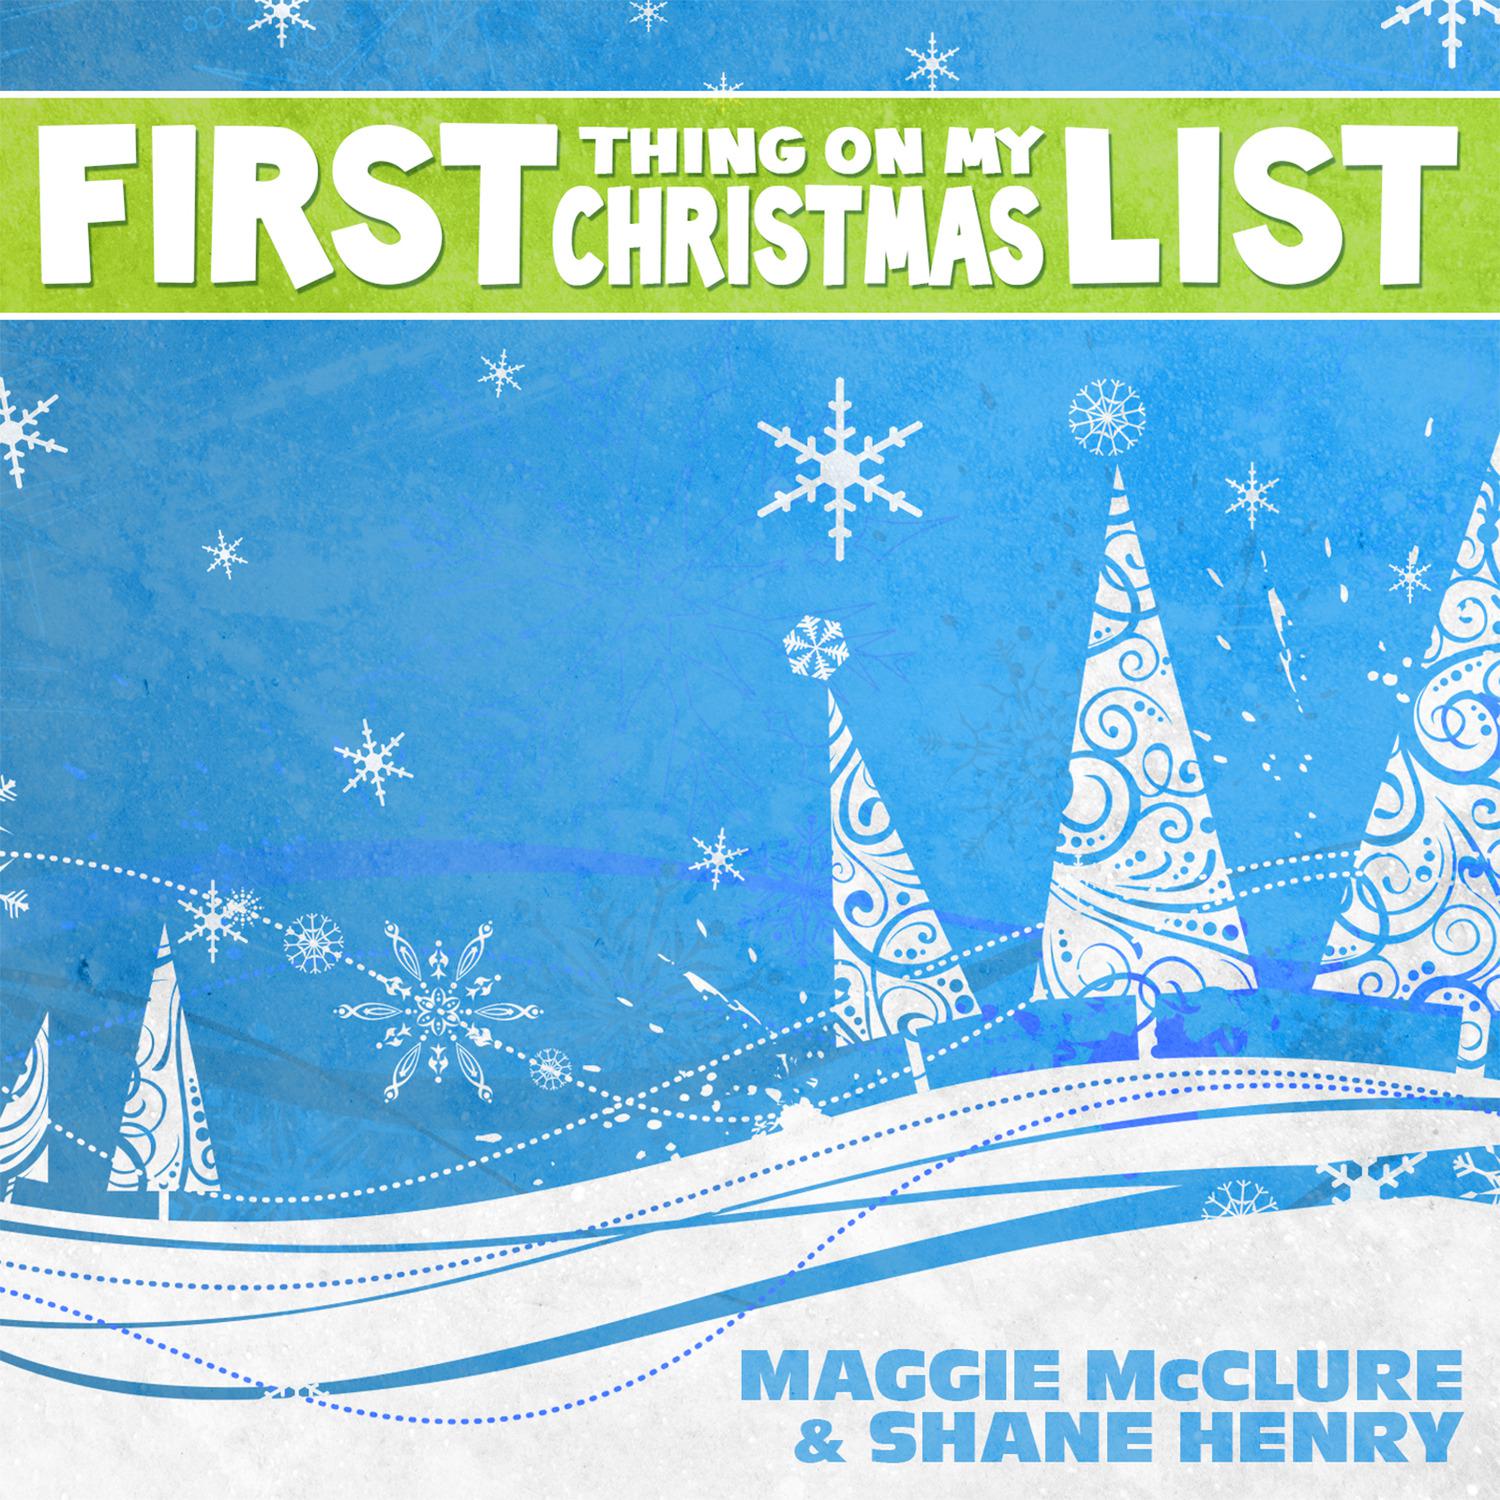 Maggie McClure - First Thing on My Christmas List